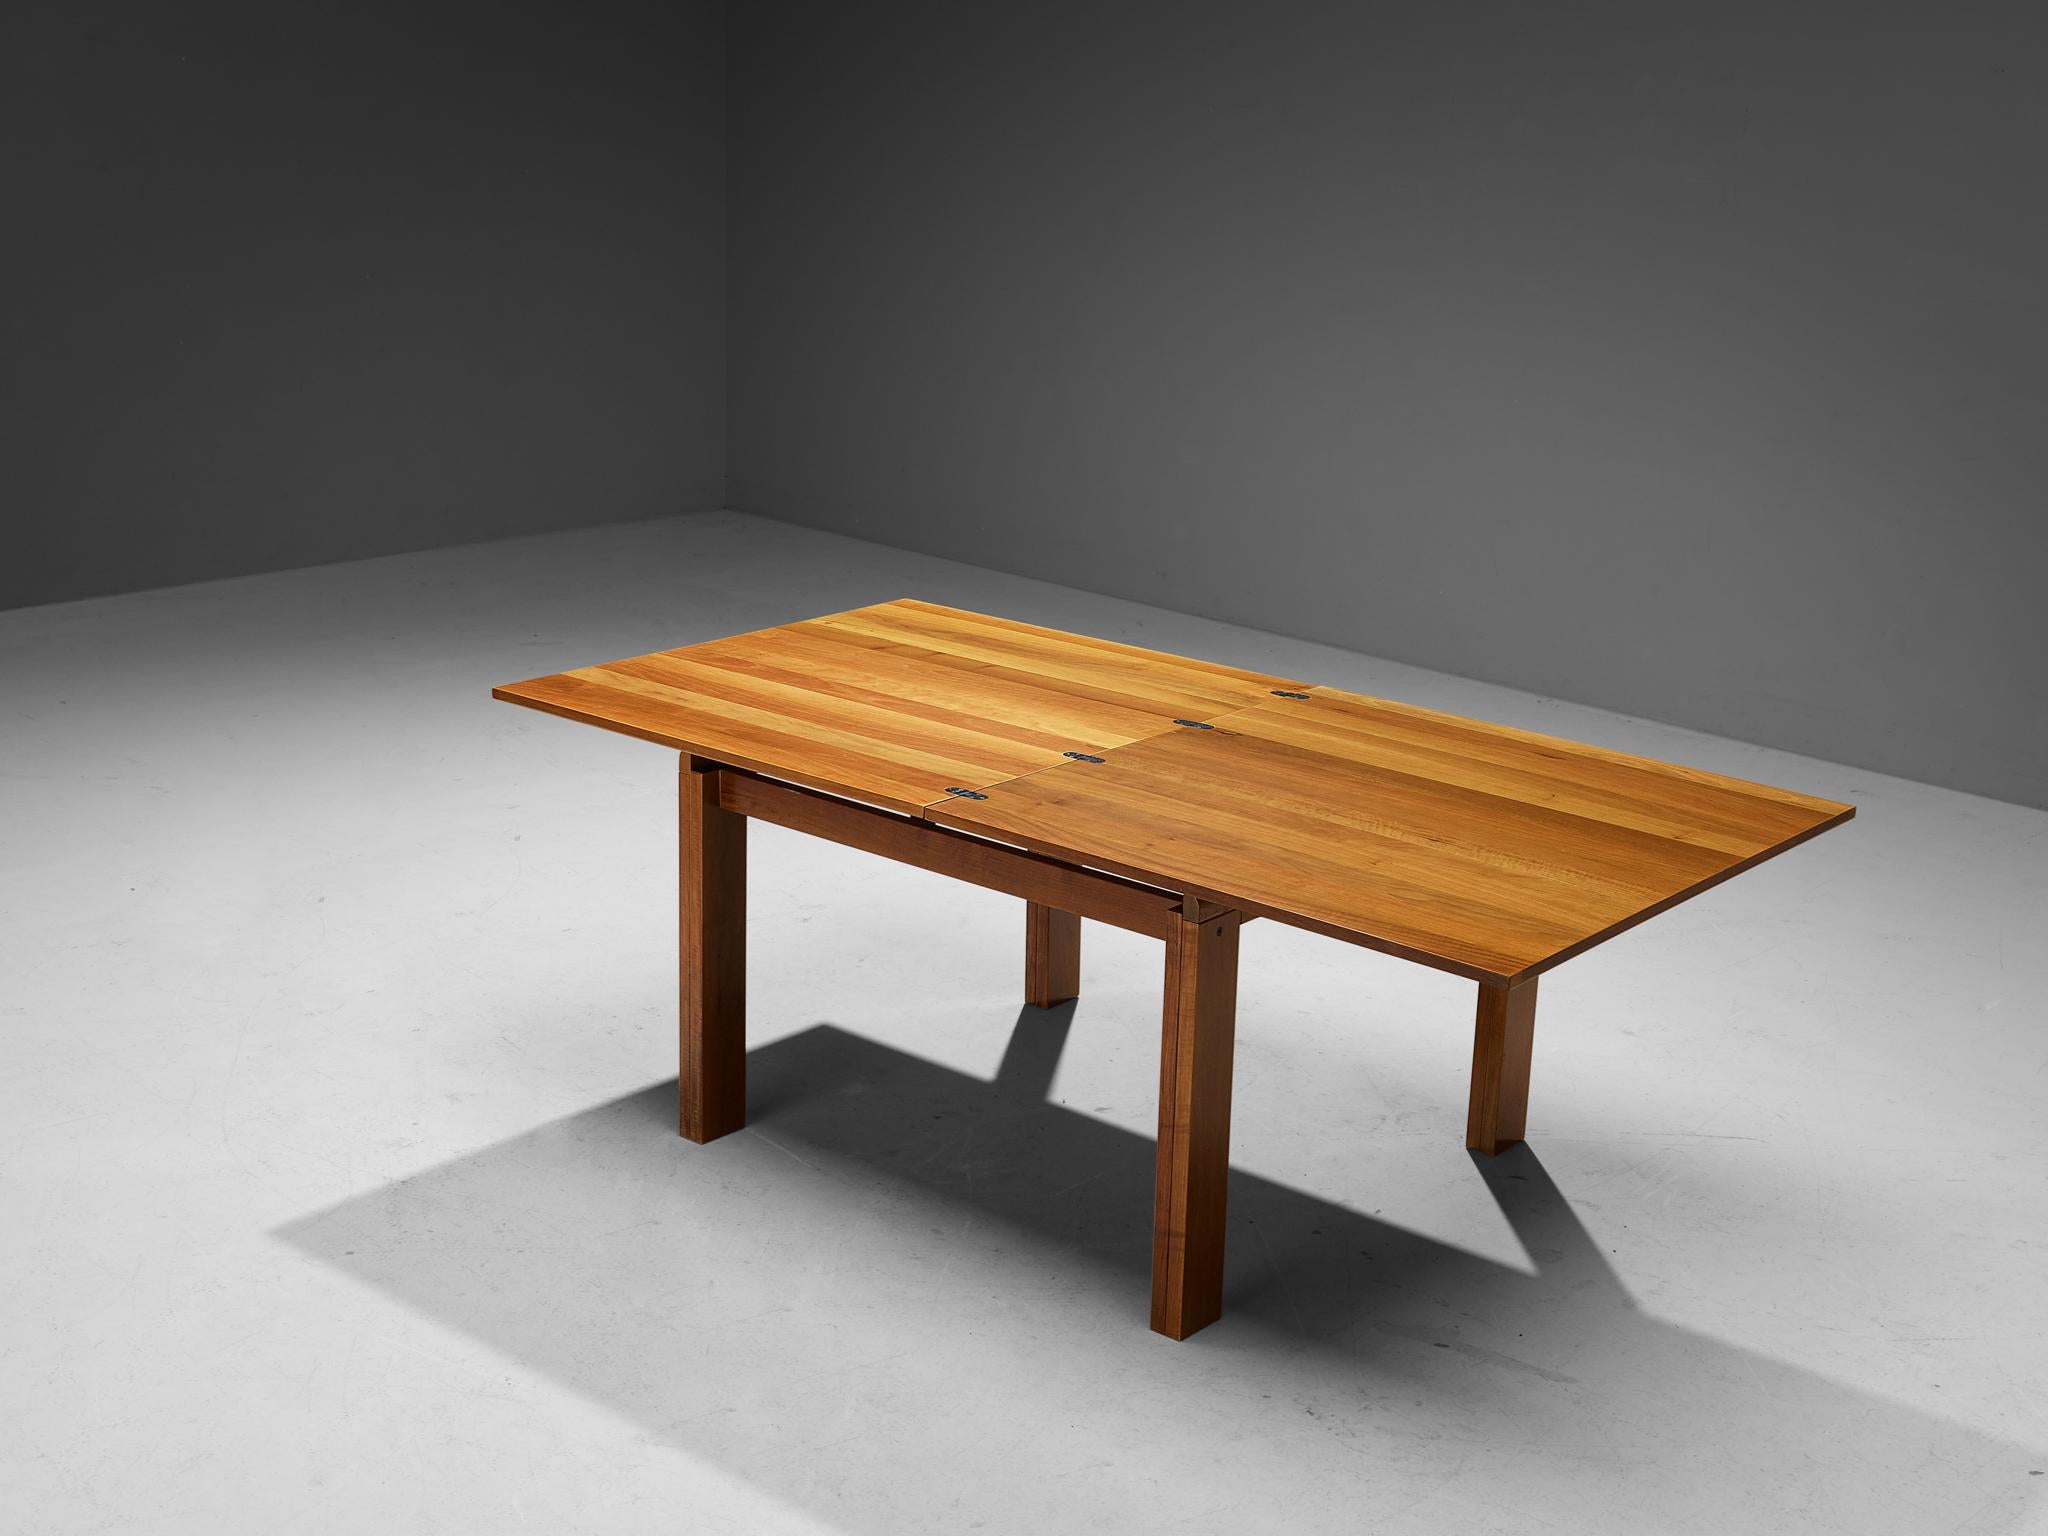 Dining table, walnut, metal, Italy, 1970s.

This pragmatic table has a folding system, meaning that this piece can easily be transformed into an extended version to enjoy a larger example. The overall appearance of this table is clear, geometric,